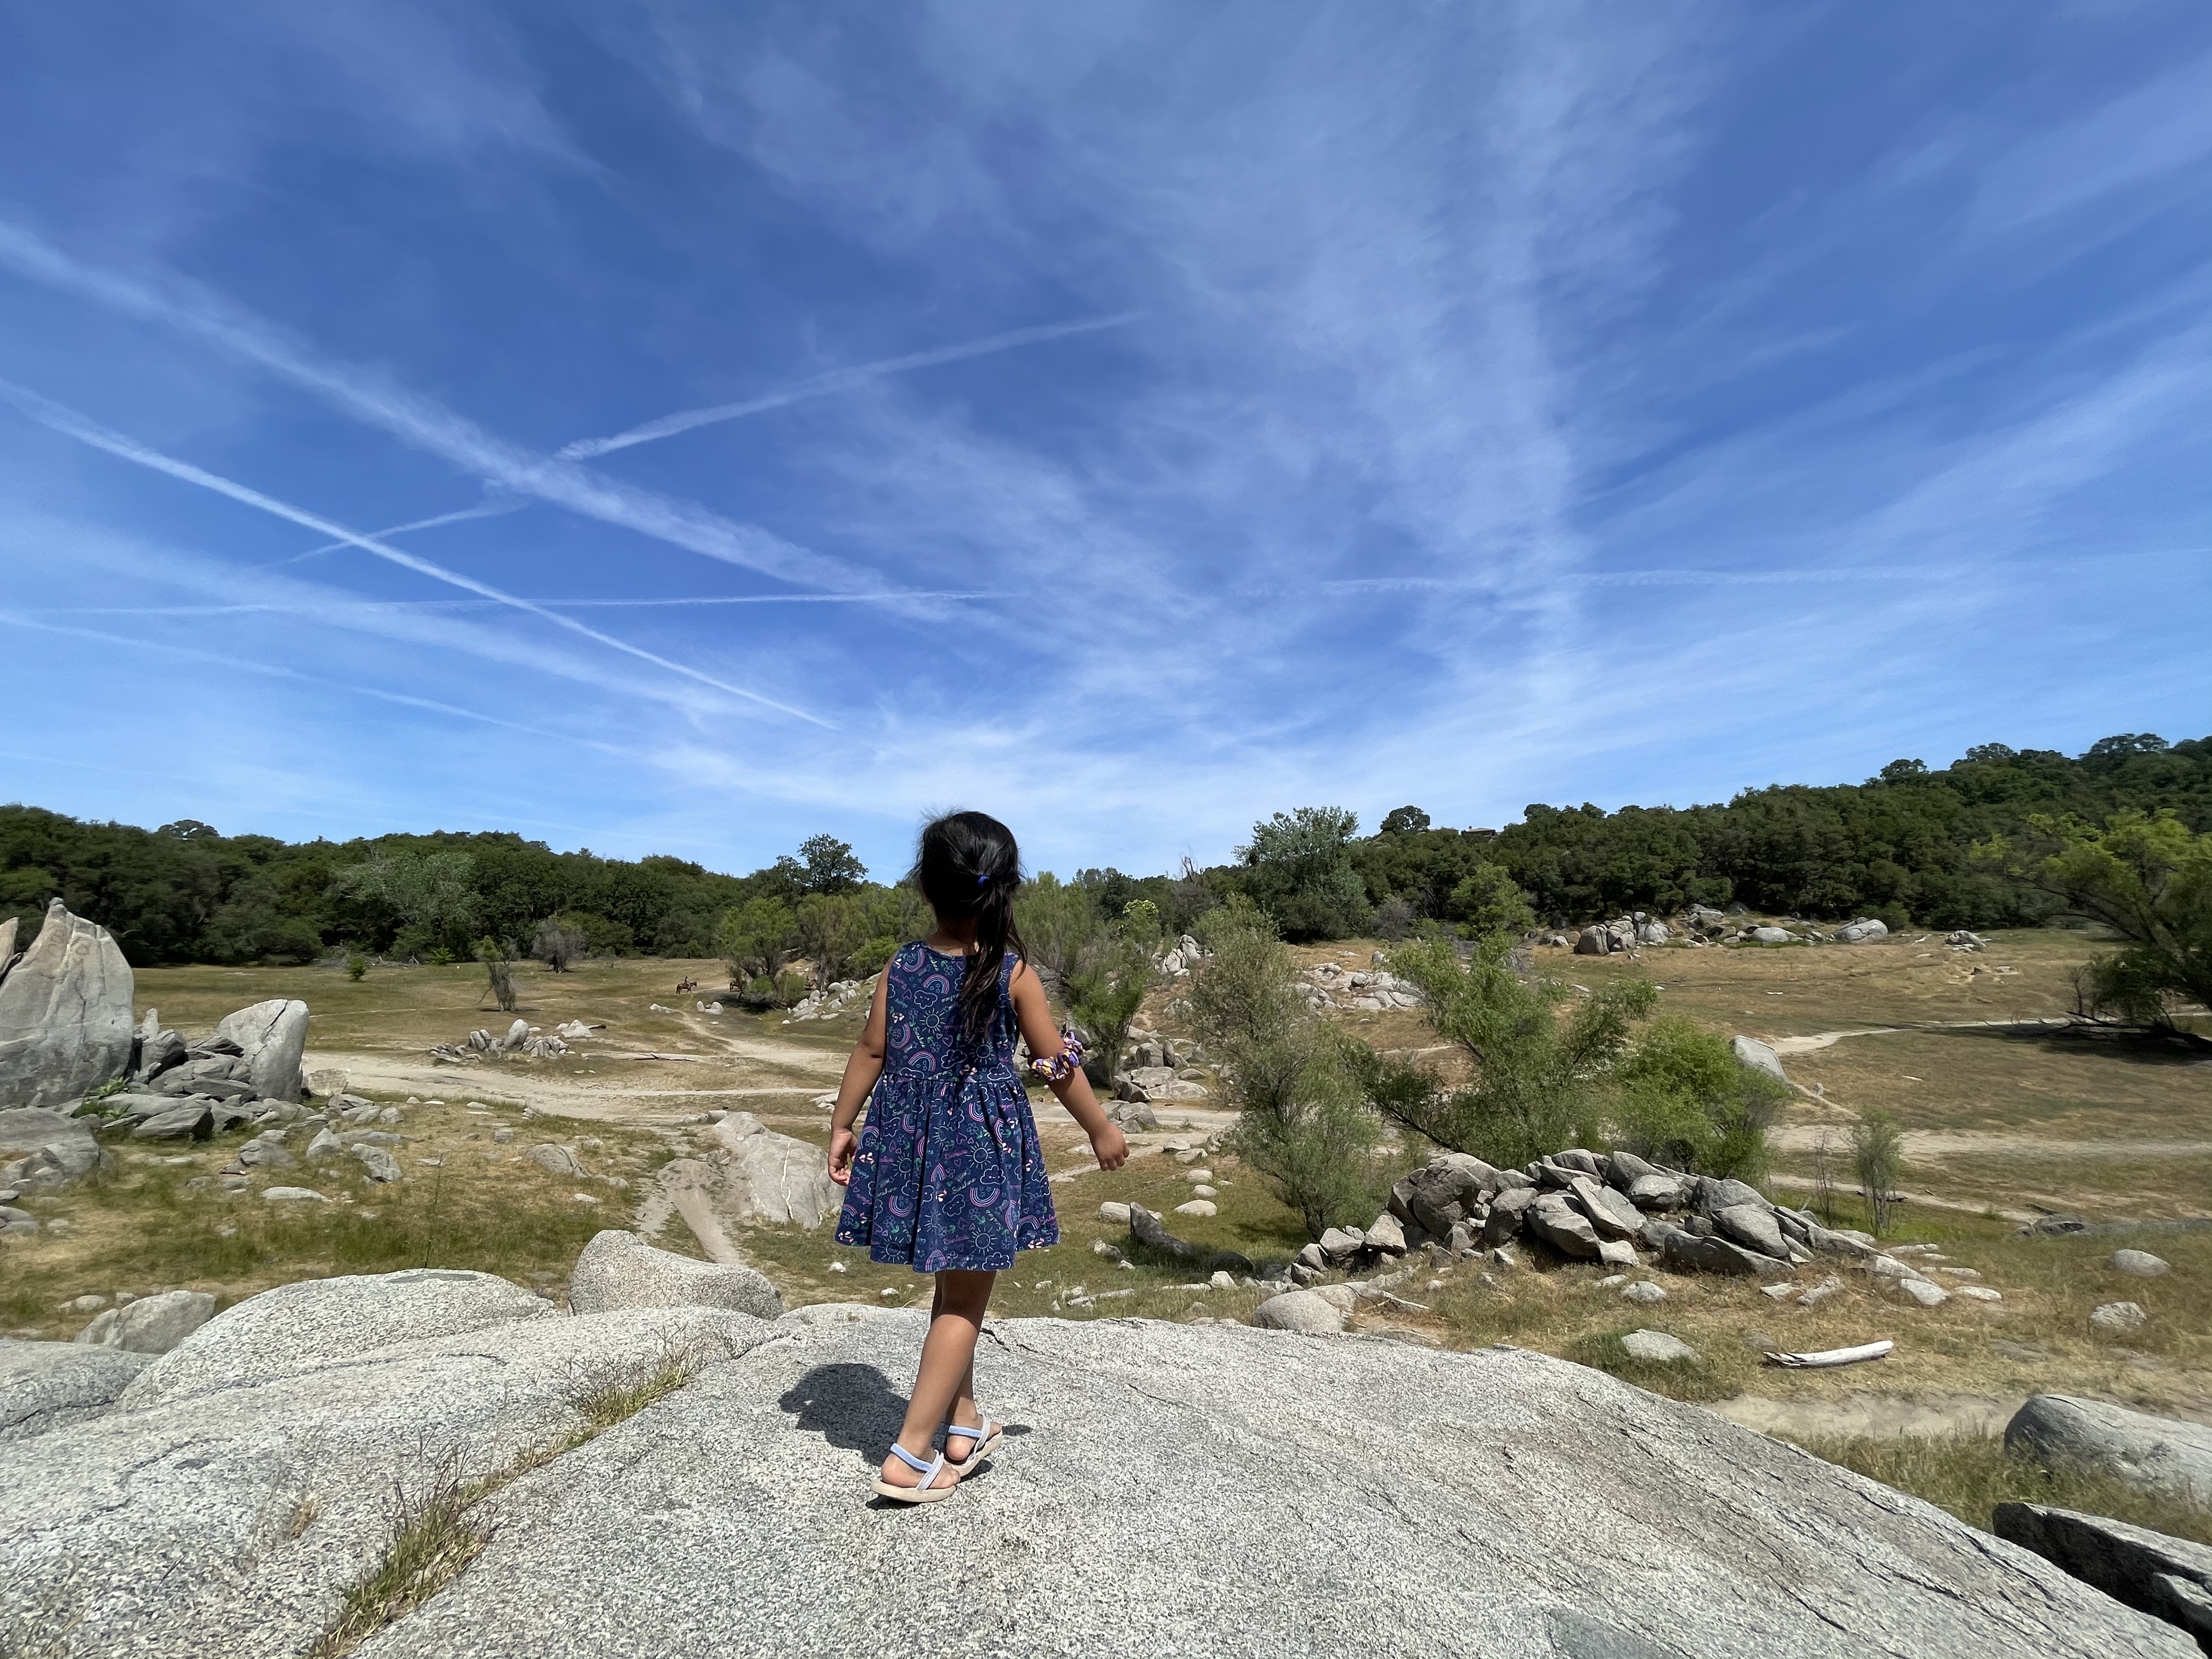 A child stands atop one of the crags found at Beeks Bight, with a hazy blue sky in the background.